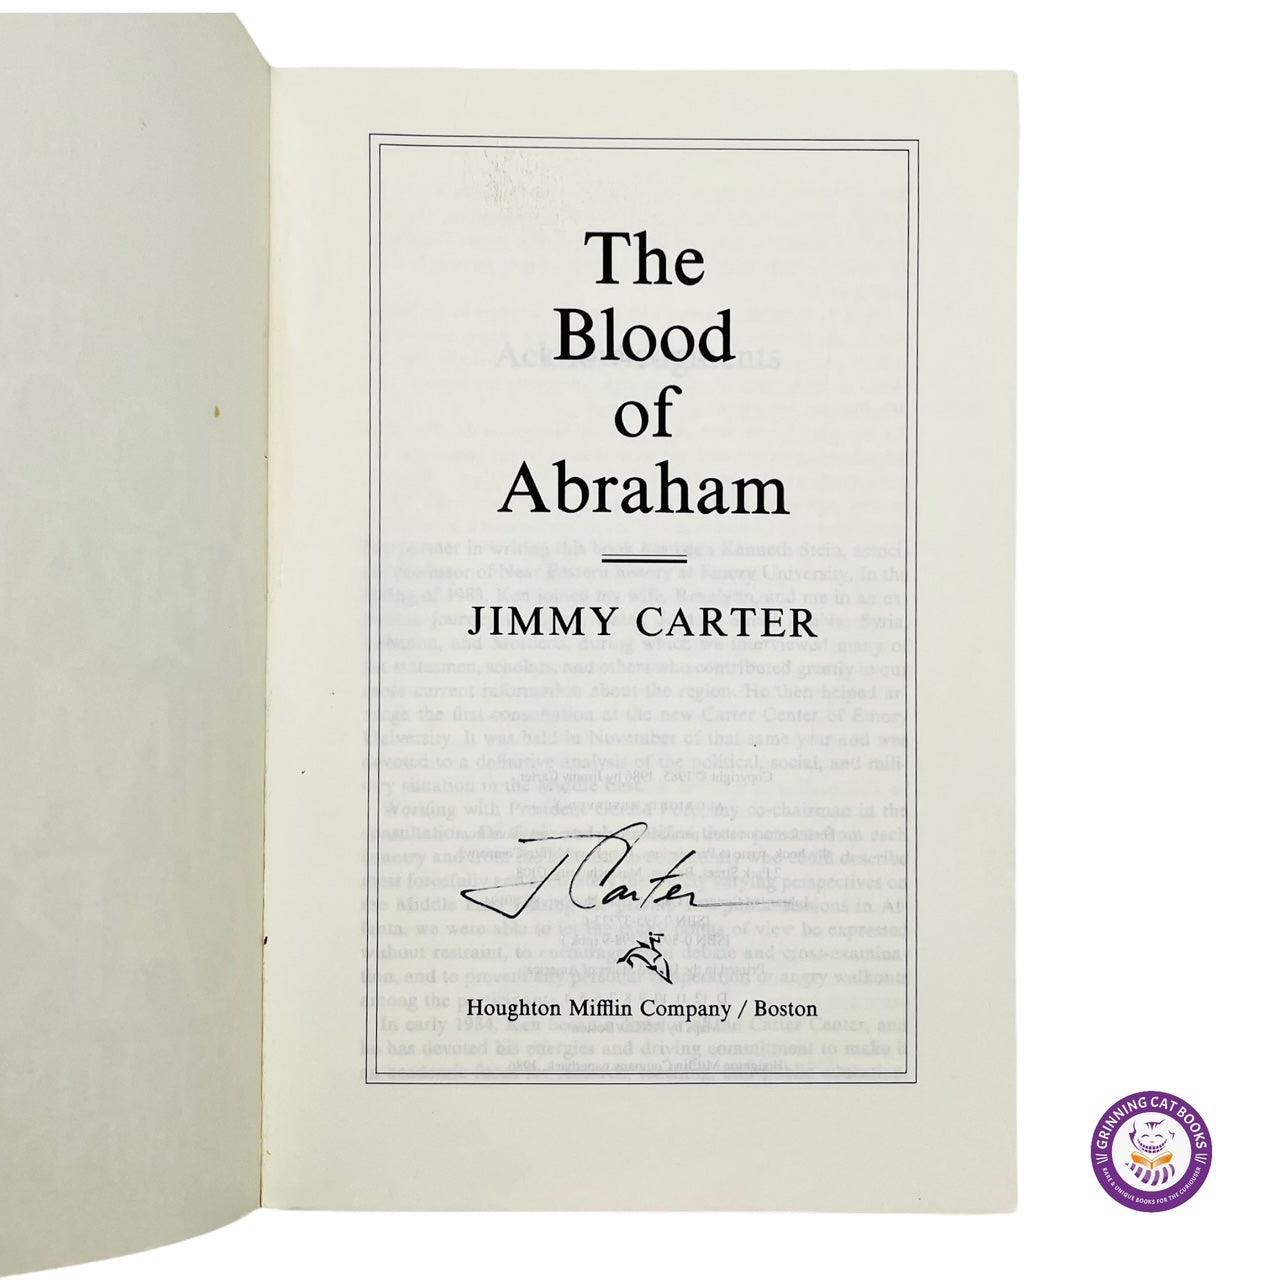 The Blood of Abraham: Insights into the Middle East (signed by President Carter) - Grinning Cat Books - books - AMERICAN HISTORY, HISTORY, JIMMY CARTER, PRESIDENTS, SIGNED